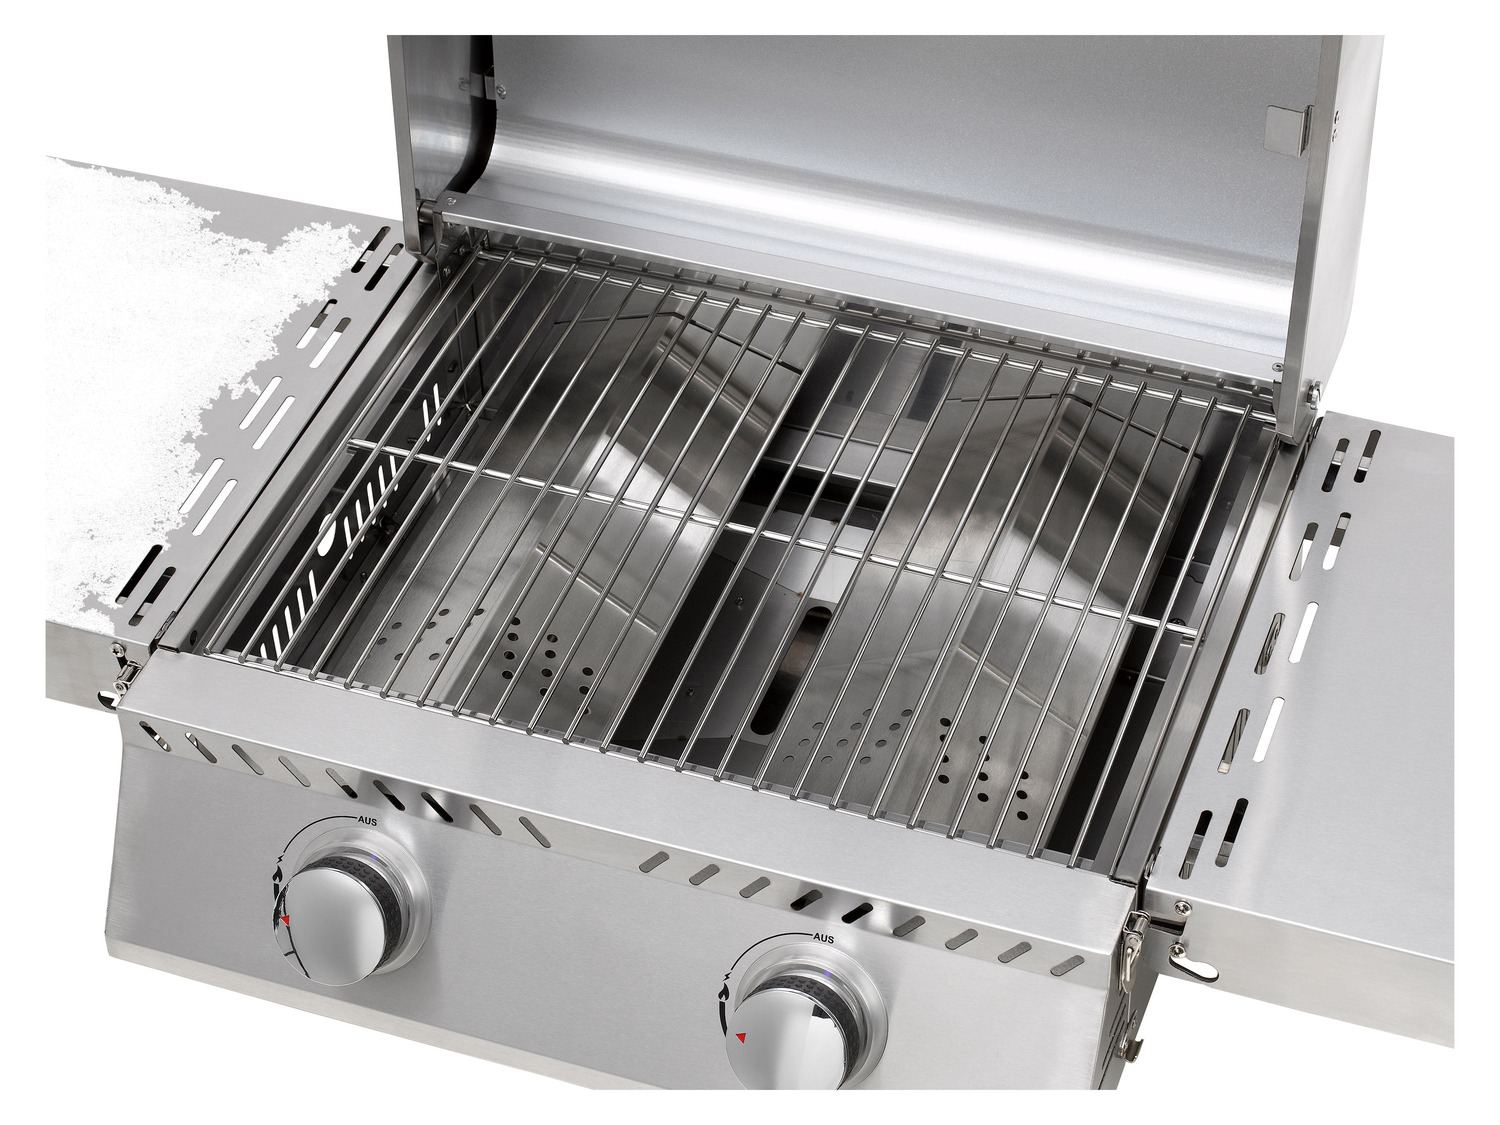 tepro Gasgrill »Chicago« Special Edition, 2 Brenner, 6…